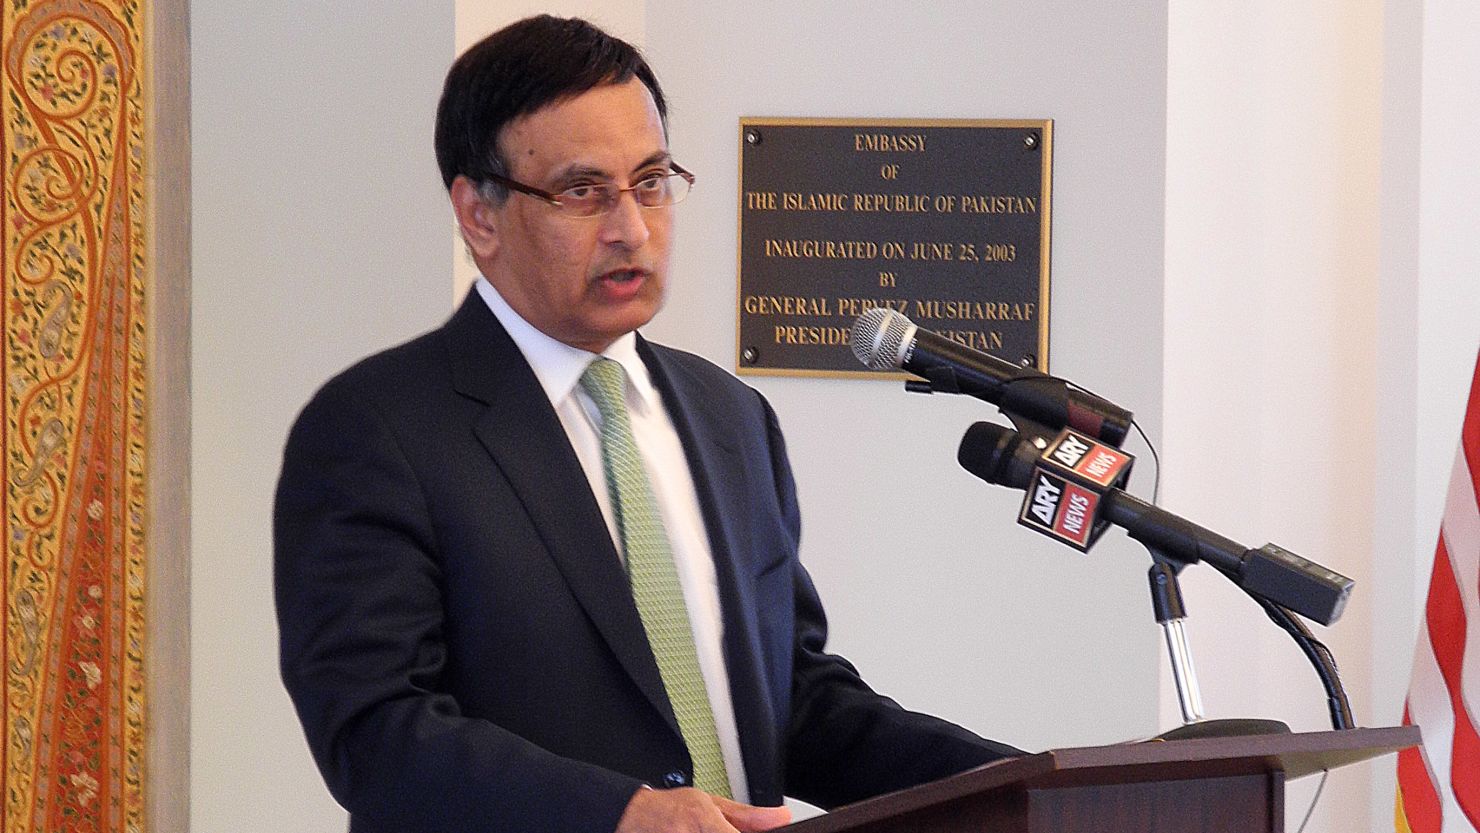 Pakistan's prime minister asked his country's ambassador to the United States, Husain Haqqani, to resign.